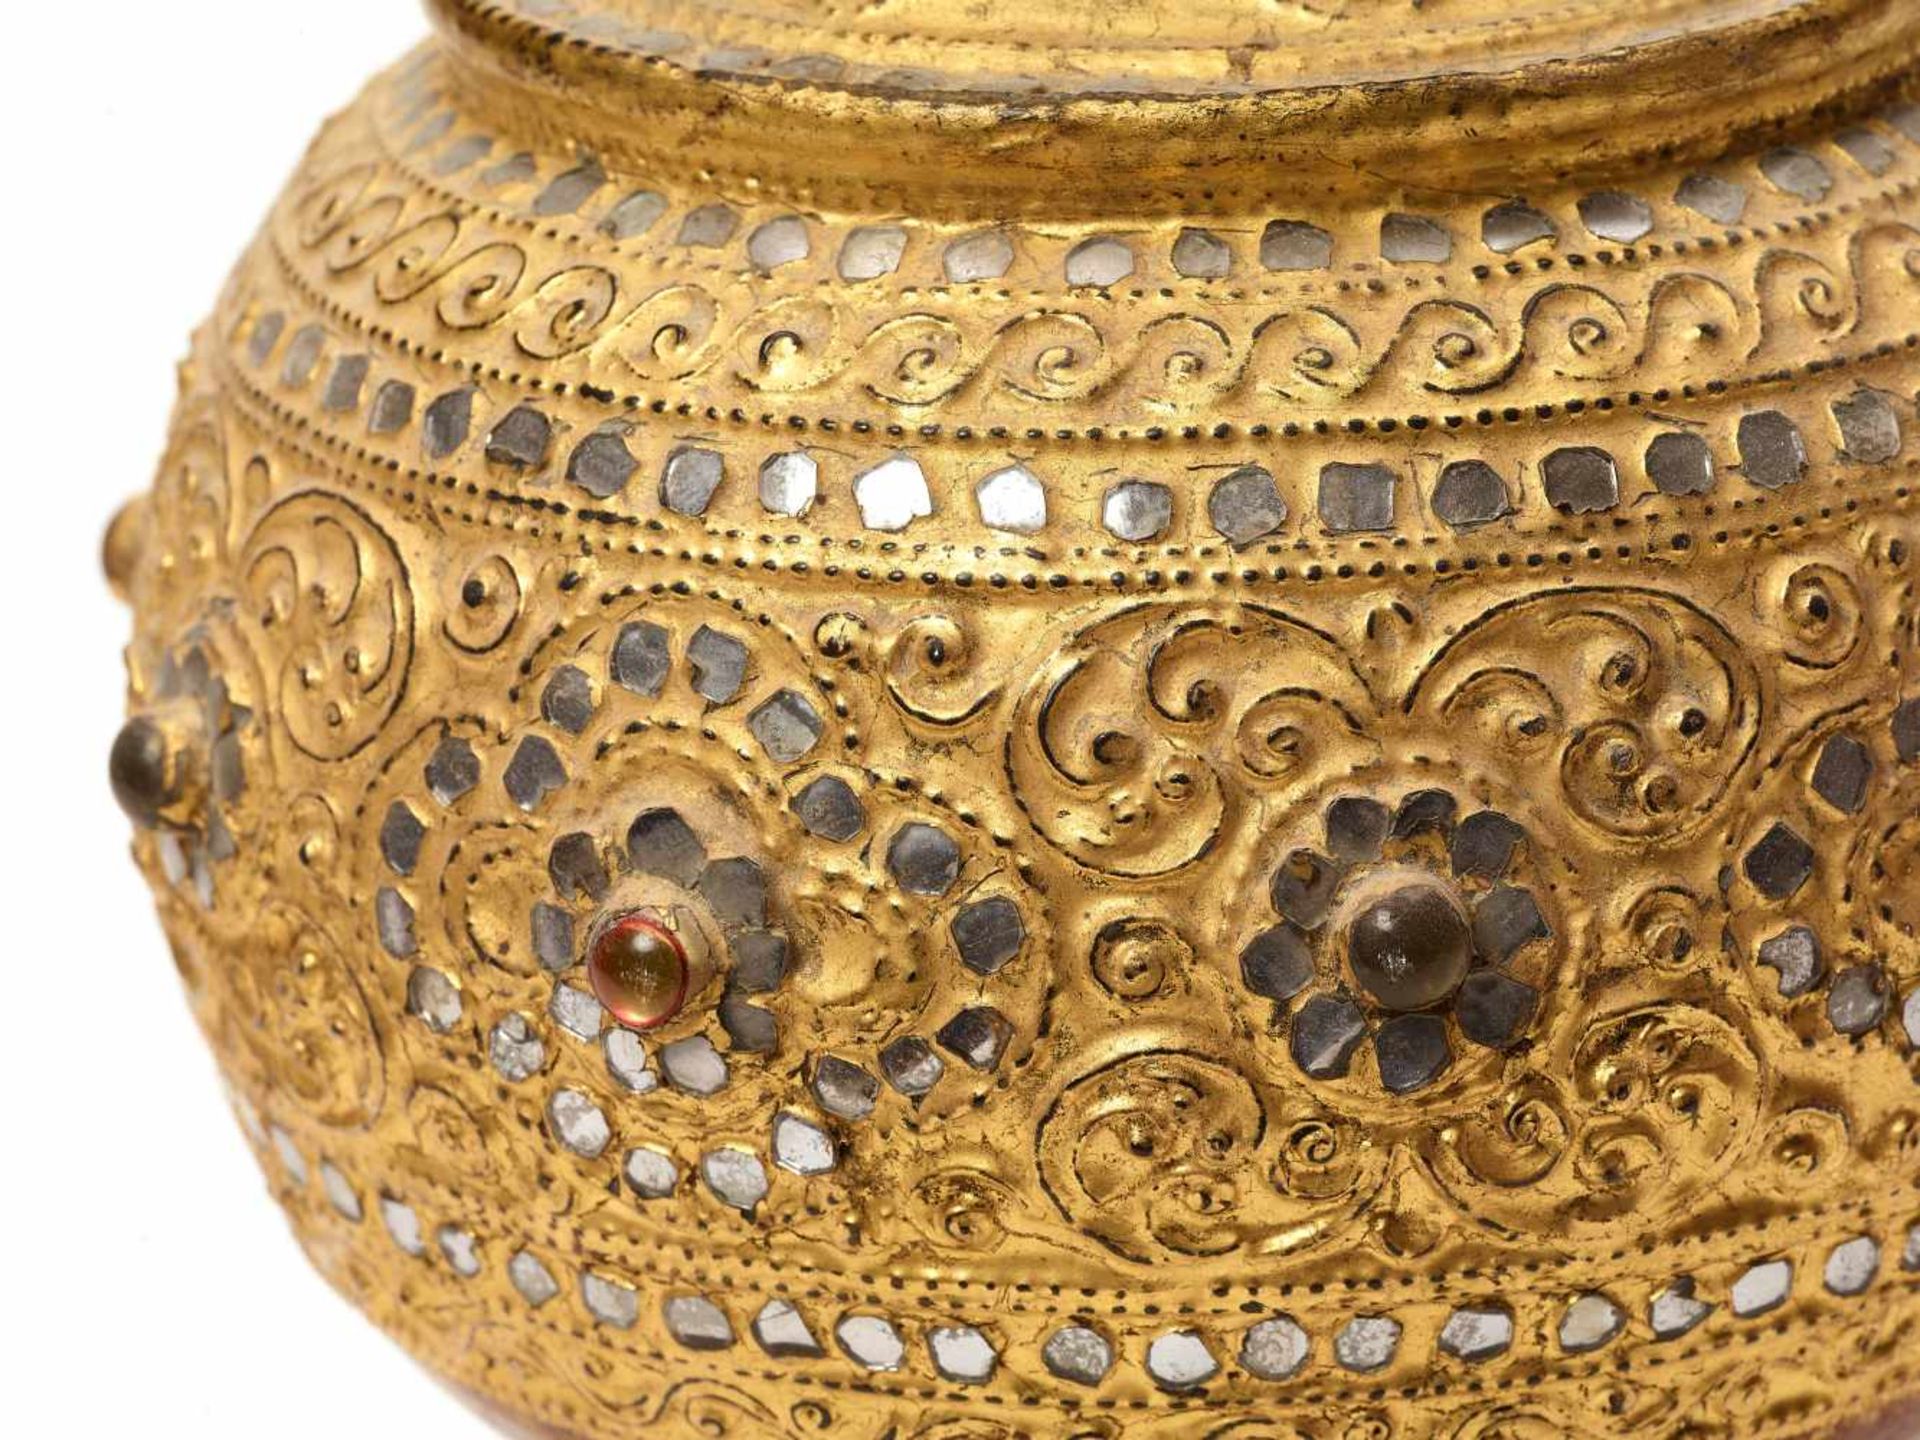 A BURMESE MANDALAY-STYLE LACQUER GILT WOOD LIDDED VESSEL IN THE SHAPE OF A PAGODAWood, gold and - Image 5 of 5